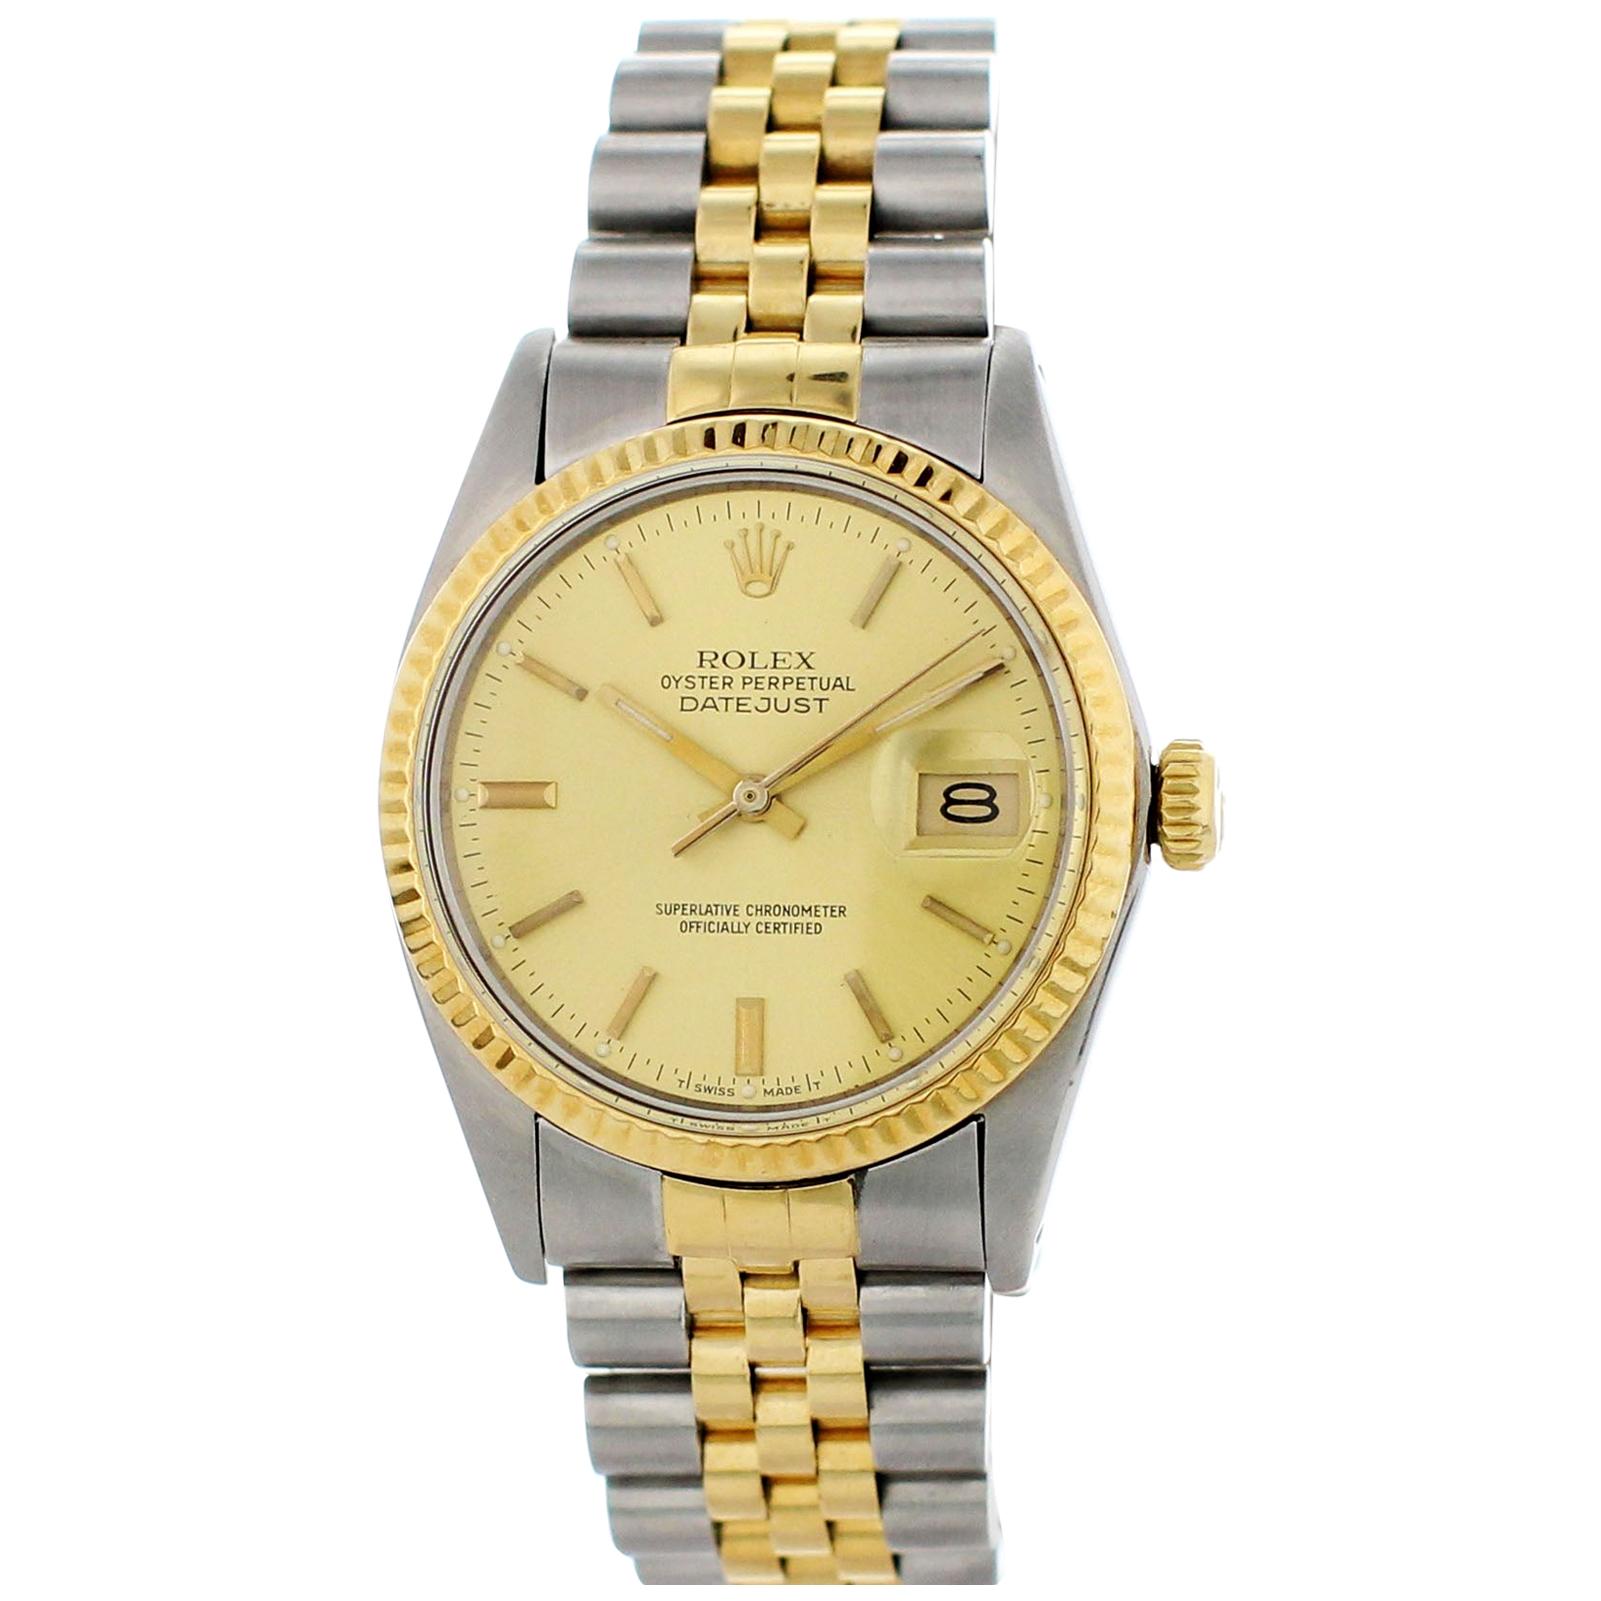 Rolex Oyster Perpetual Datejust 16013 Men's Watch